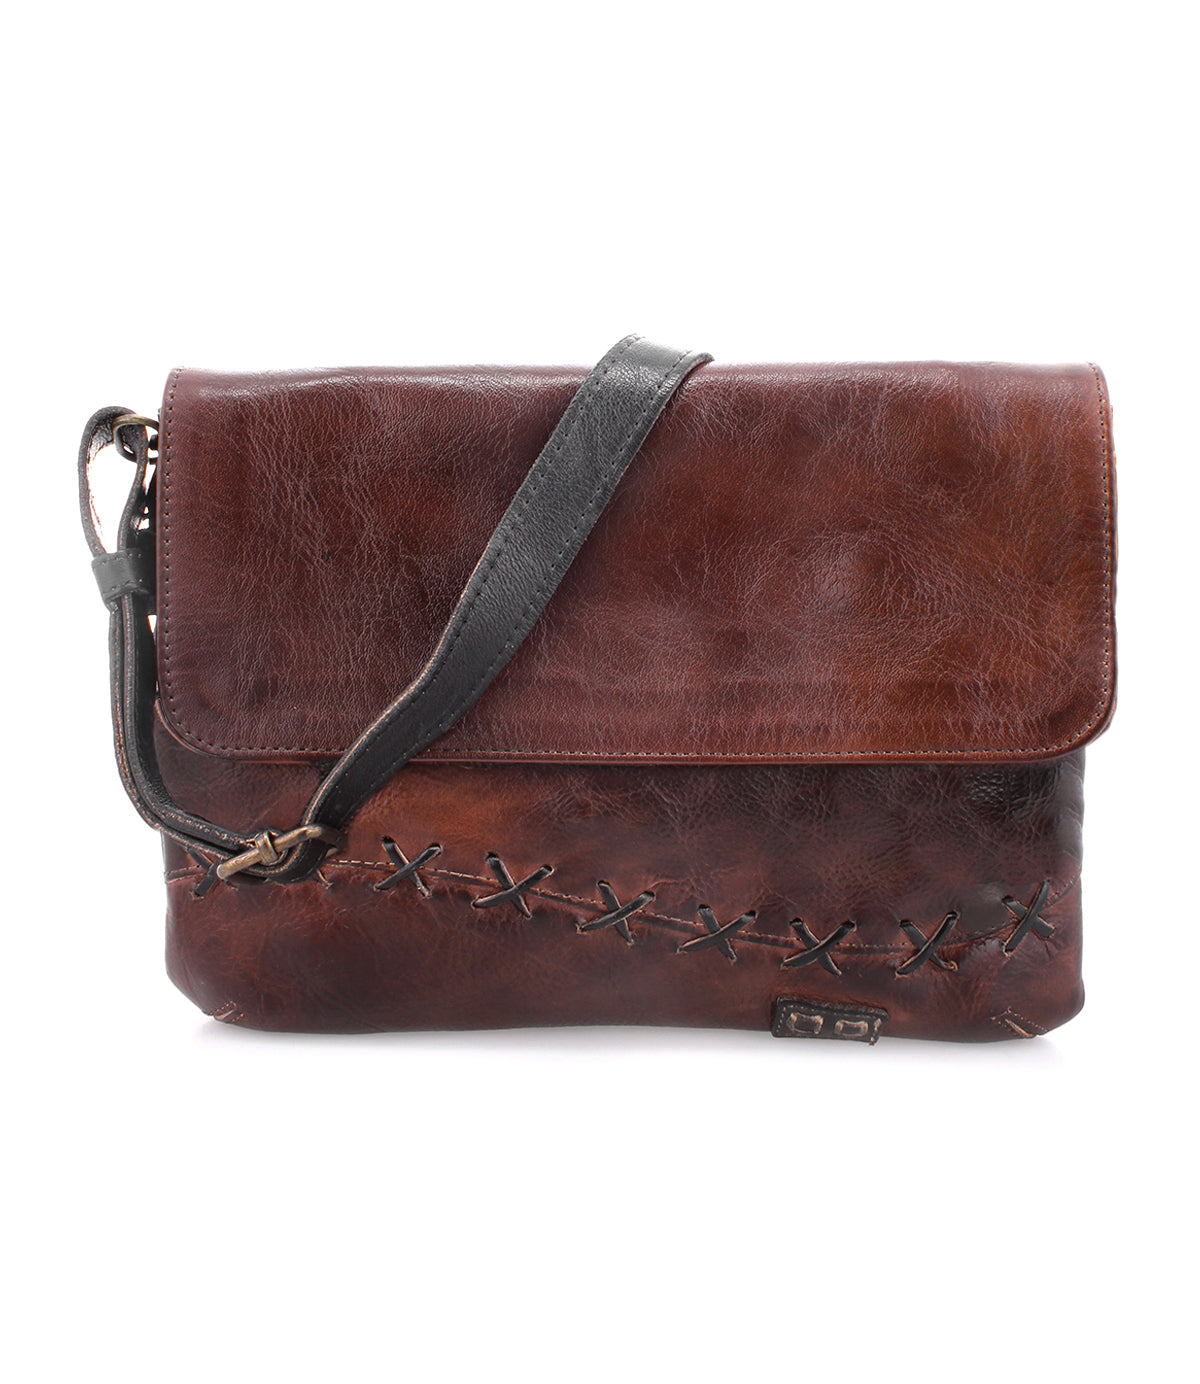 An everyday Cleo by Bed Stu brown leather crossbody bag with a zipper top closure.